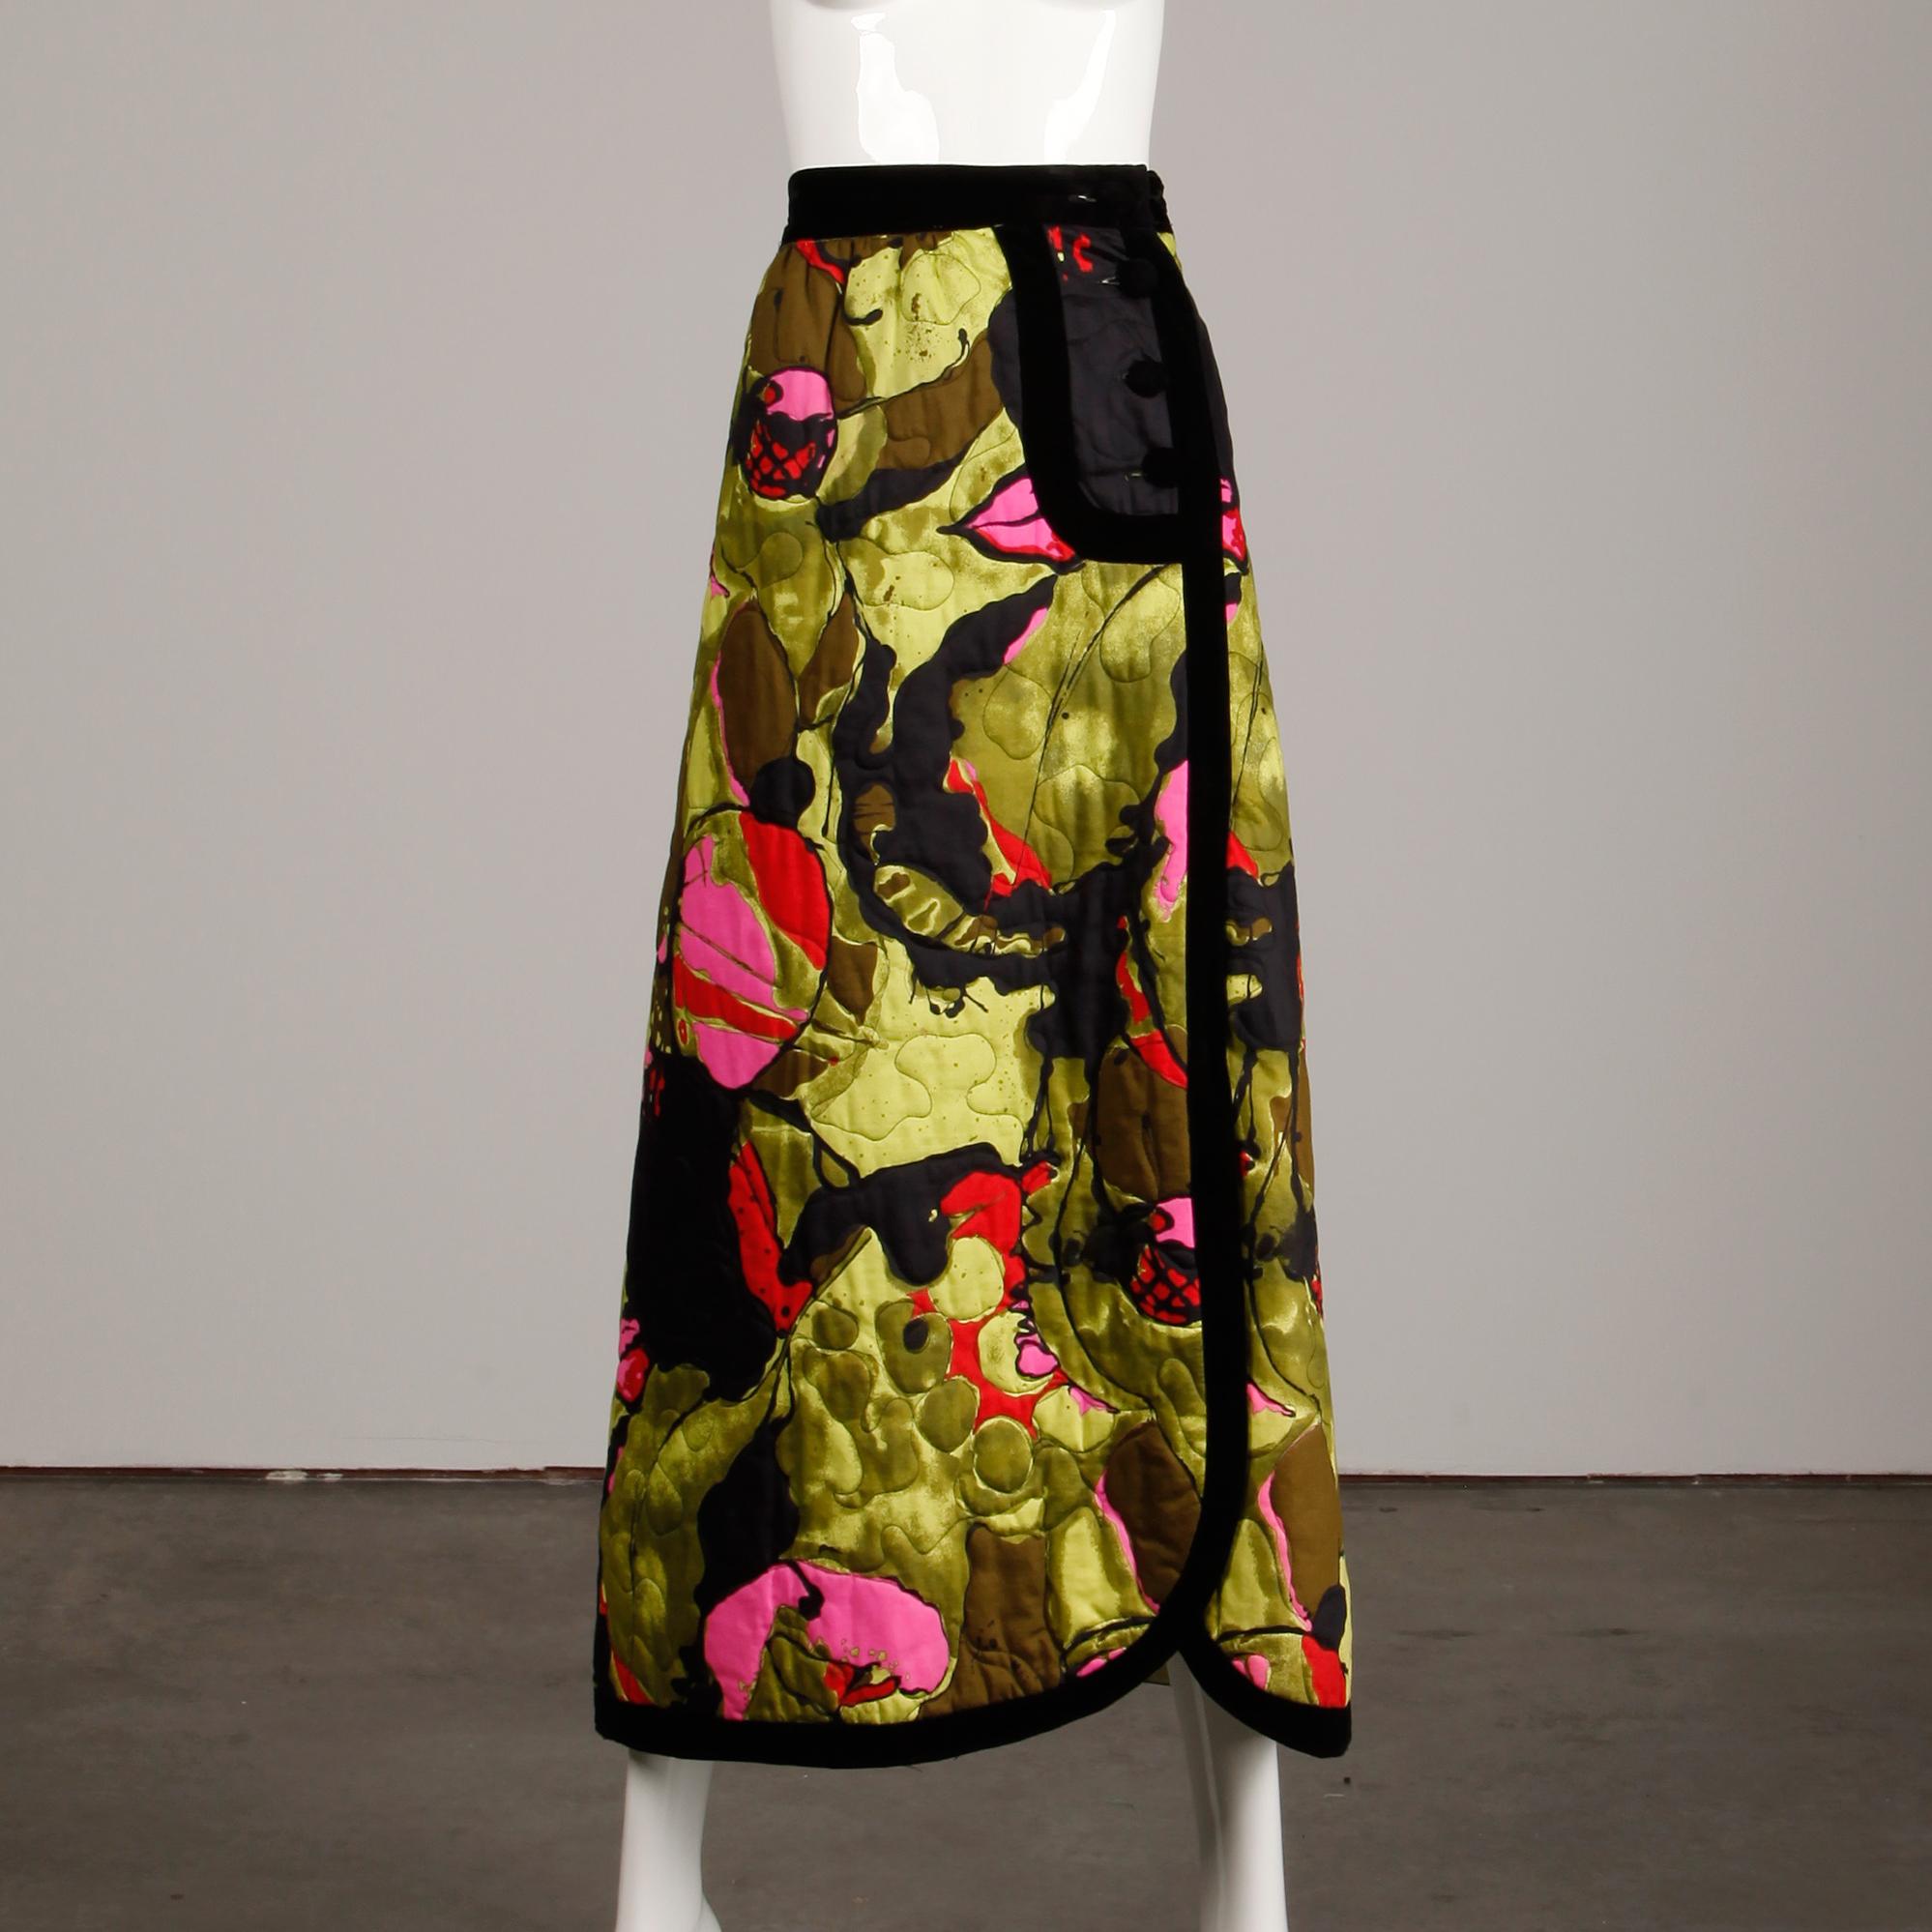 Vintage 1970s maxi skirt in green, black, pink and red quilted silk with black velvet trim by Dynasty. Fully lined with side button and hook closure. The marked size is 10, but the skirt fits like a modern medium. The waist measures 28